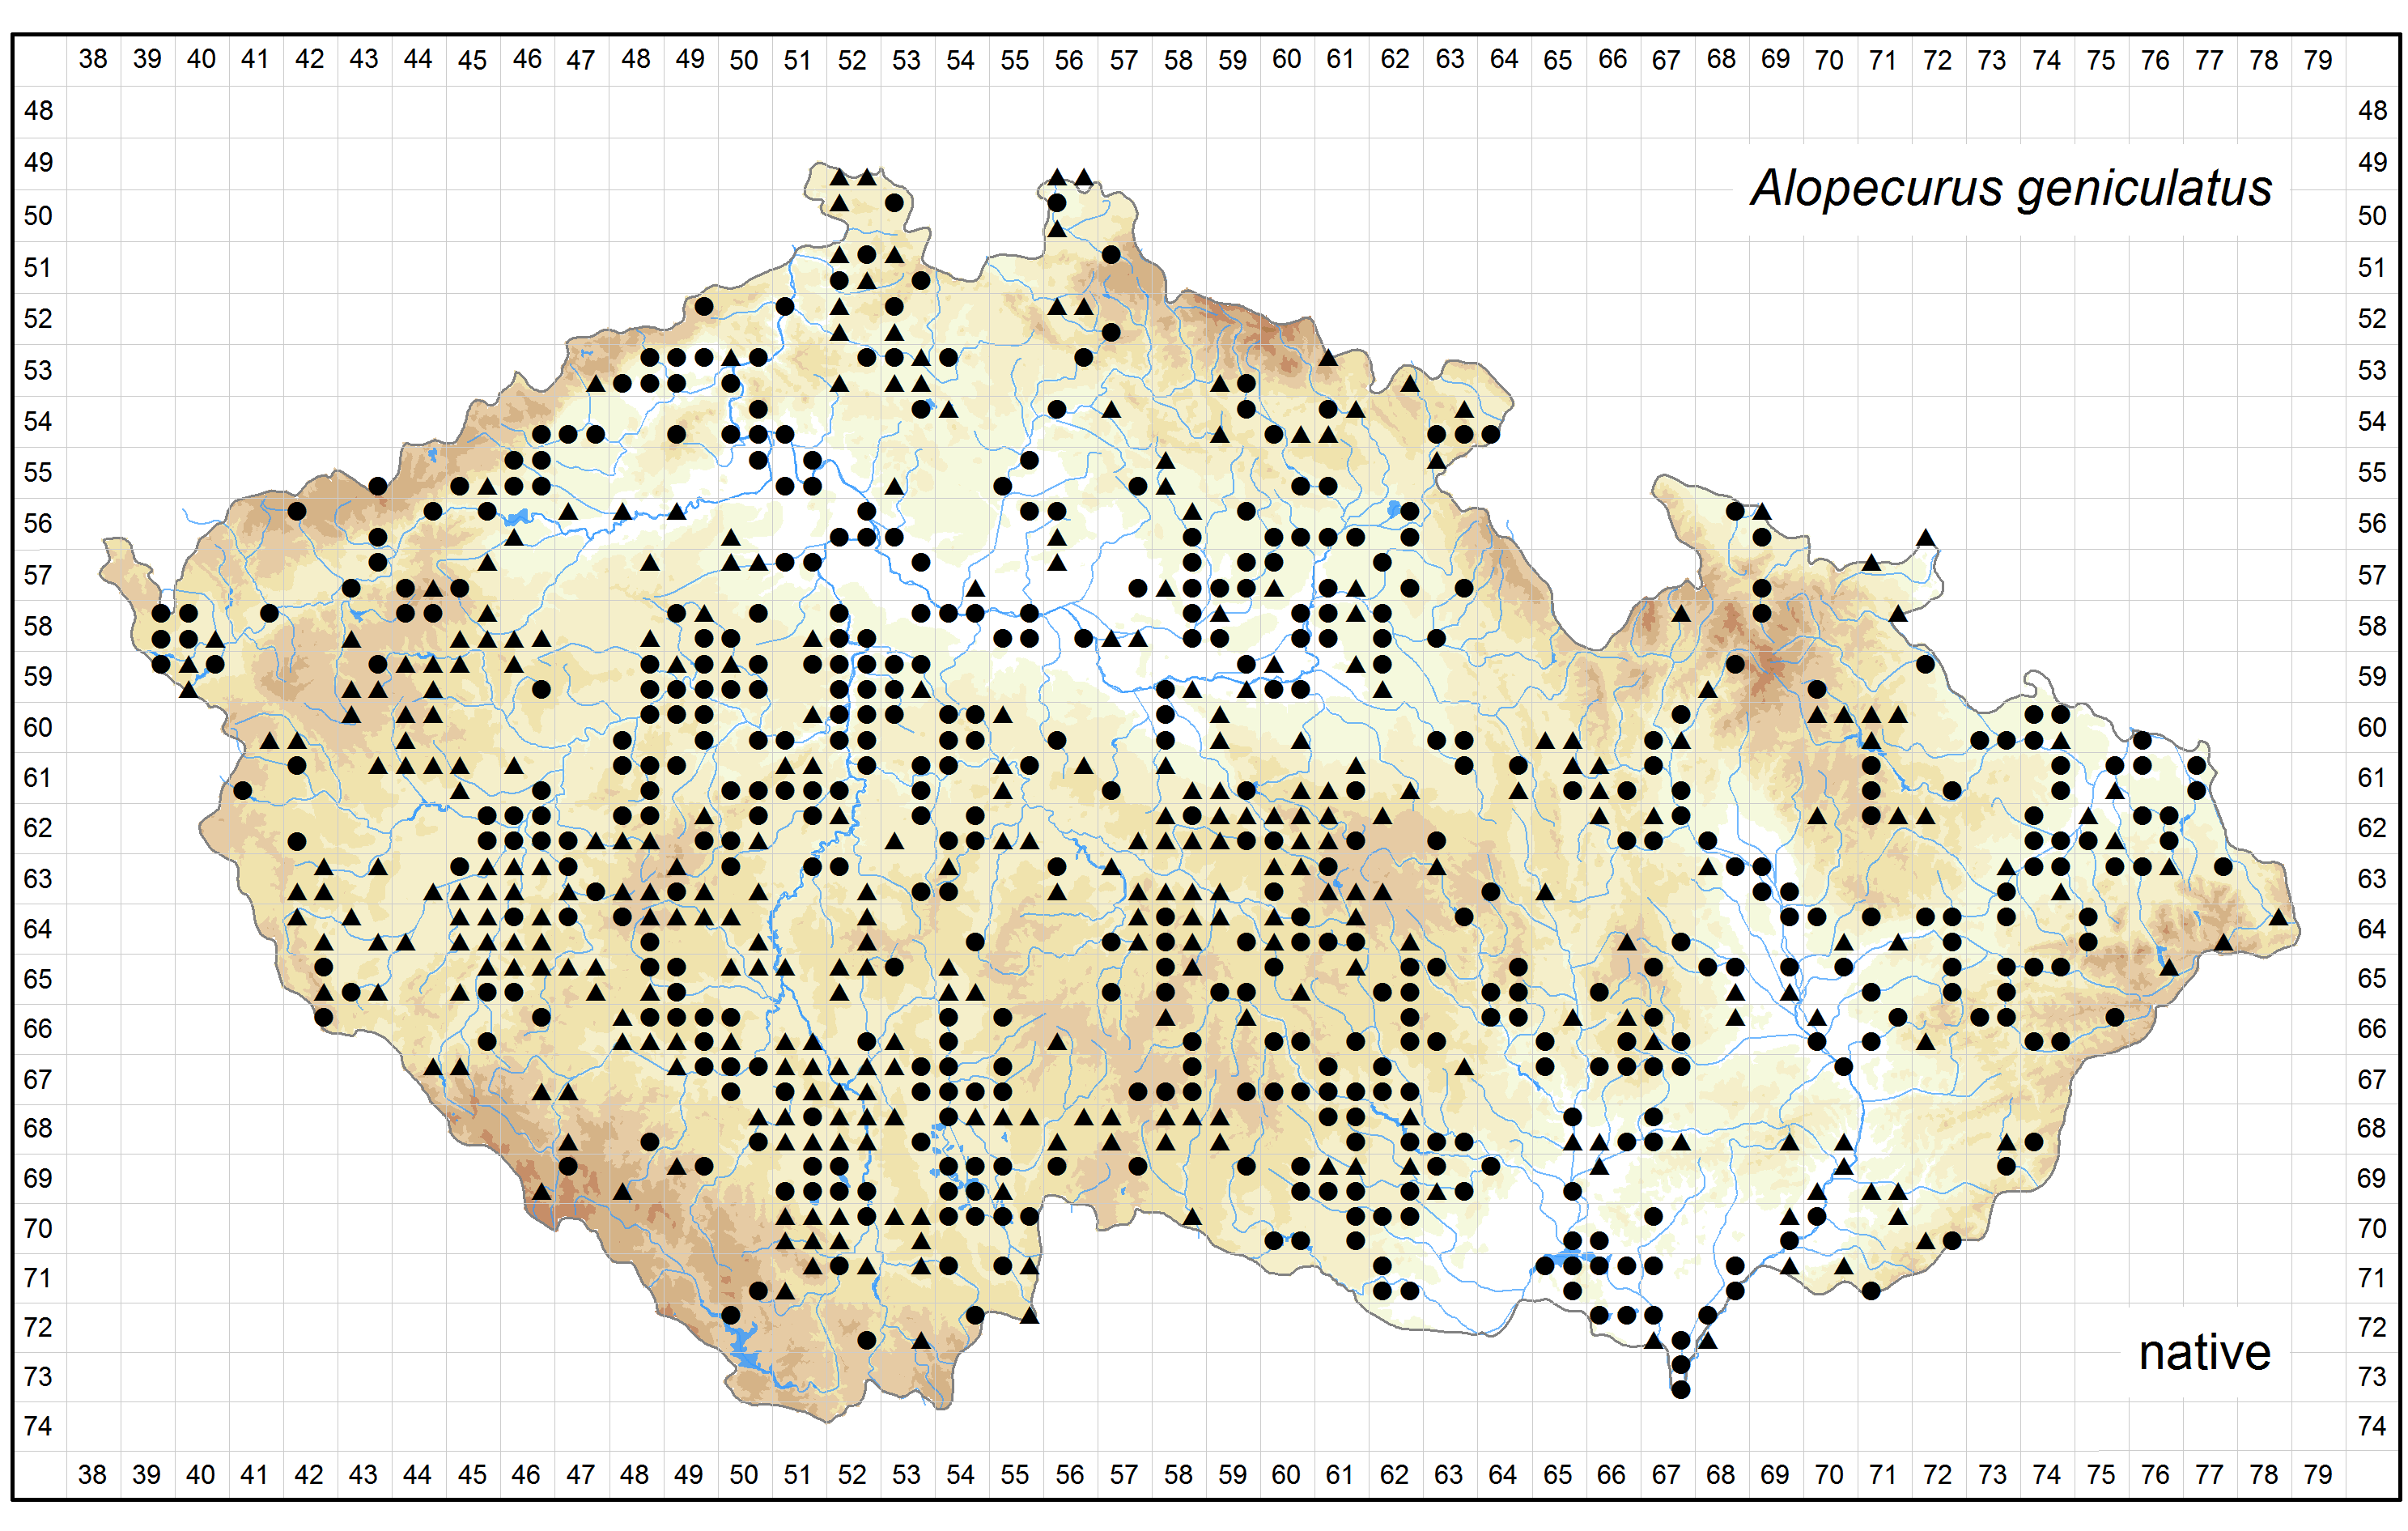 Distribution of Alopecurus geniculatus in the Czech Republic Author of the map: Petr Bureš, Jiří Danihelka Map produced on: 18-11-2015 Database records used for producing the distribution map of